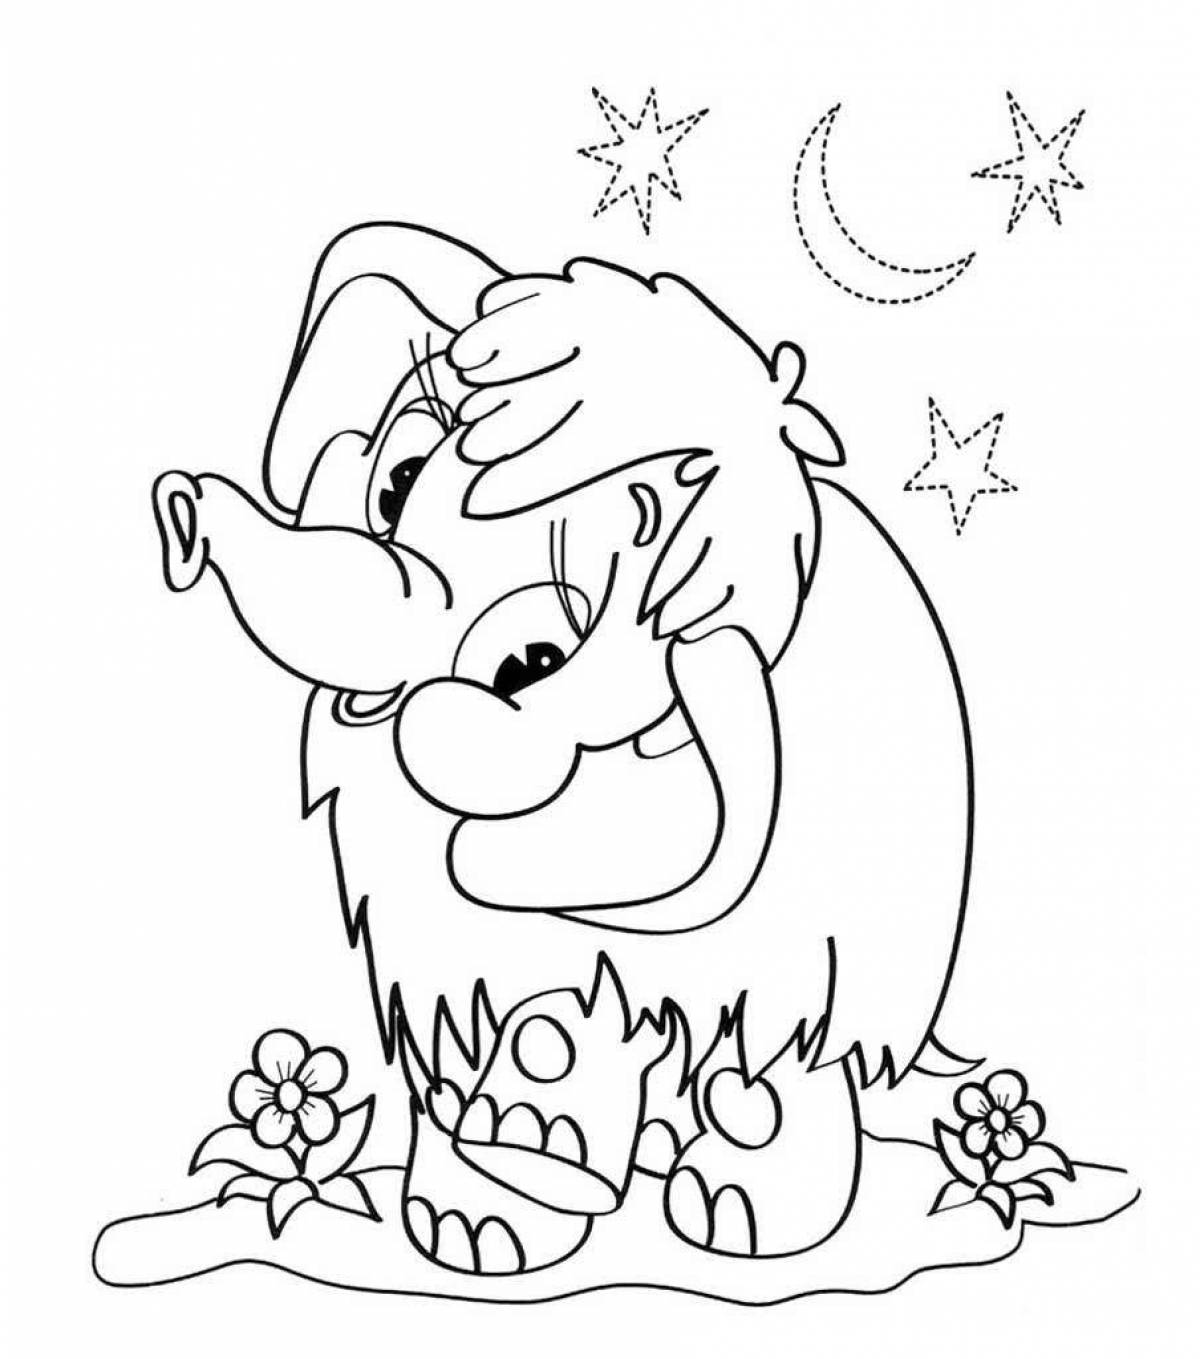 Elegant mammoth coloring page